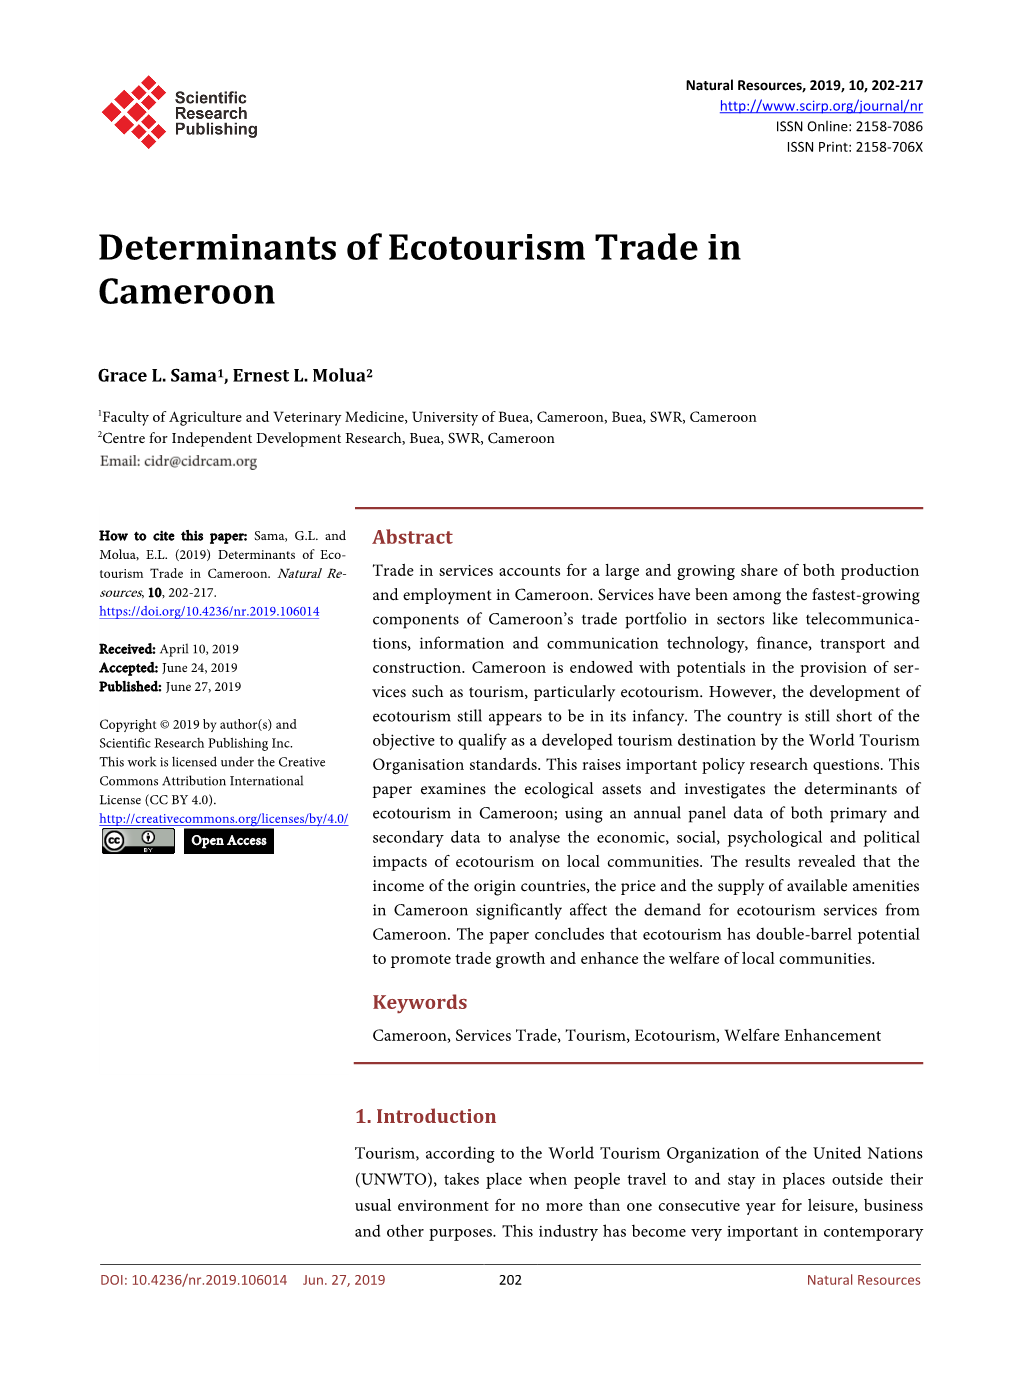 Determinants of Ecotourism Trade in Cameroon